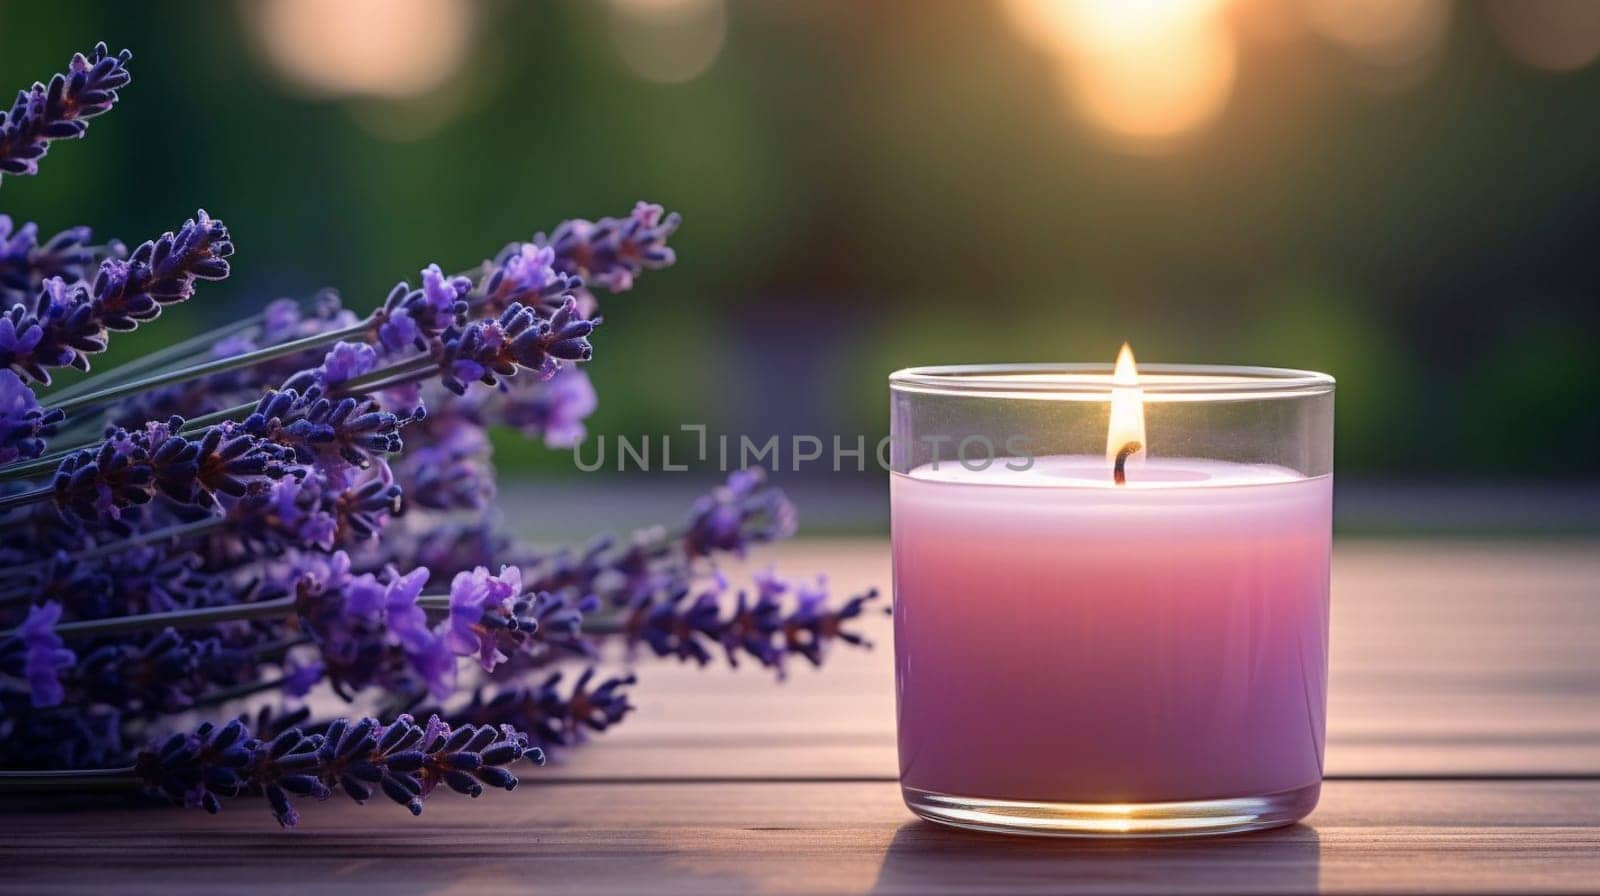 A burning candle and lavander flowers against the background of a garden. Self care concept. by kizuneko